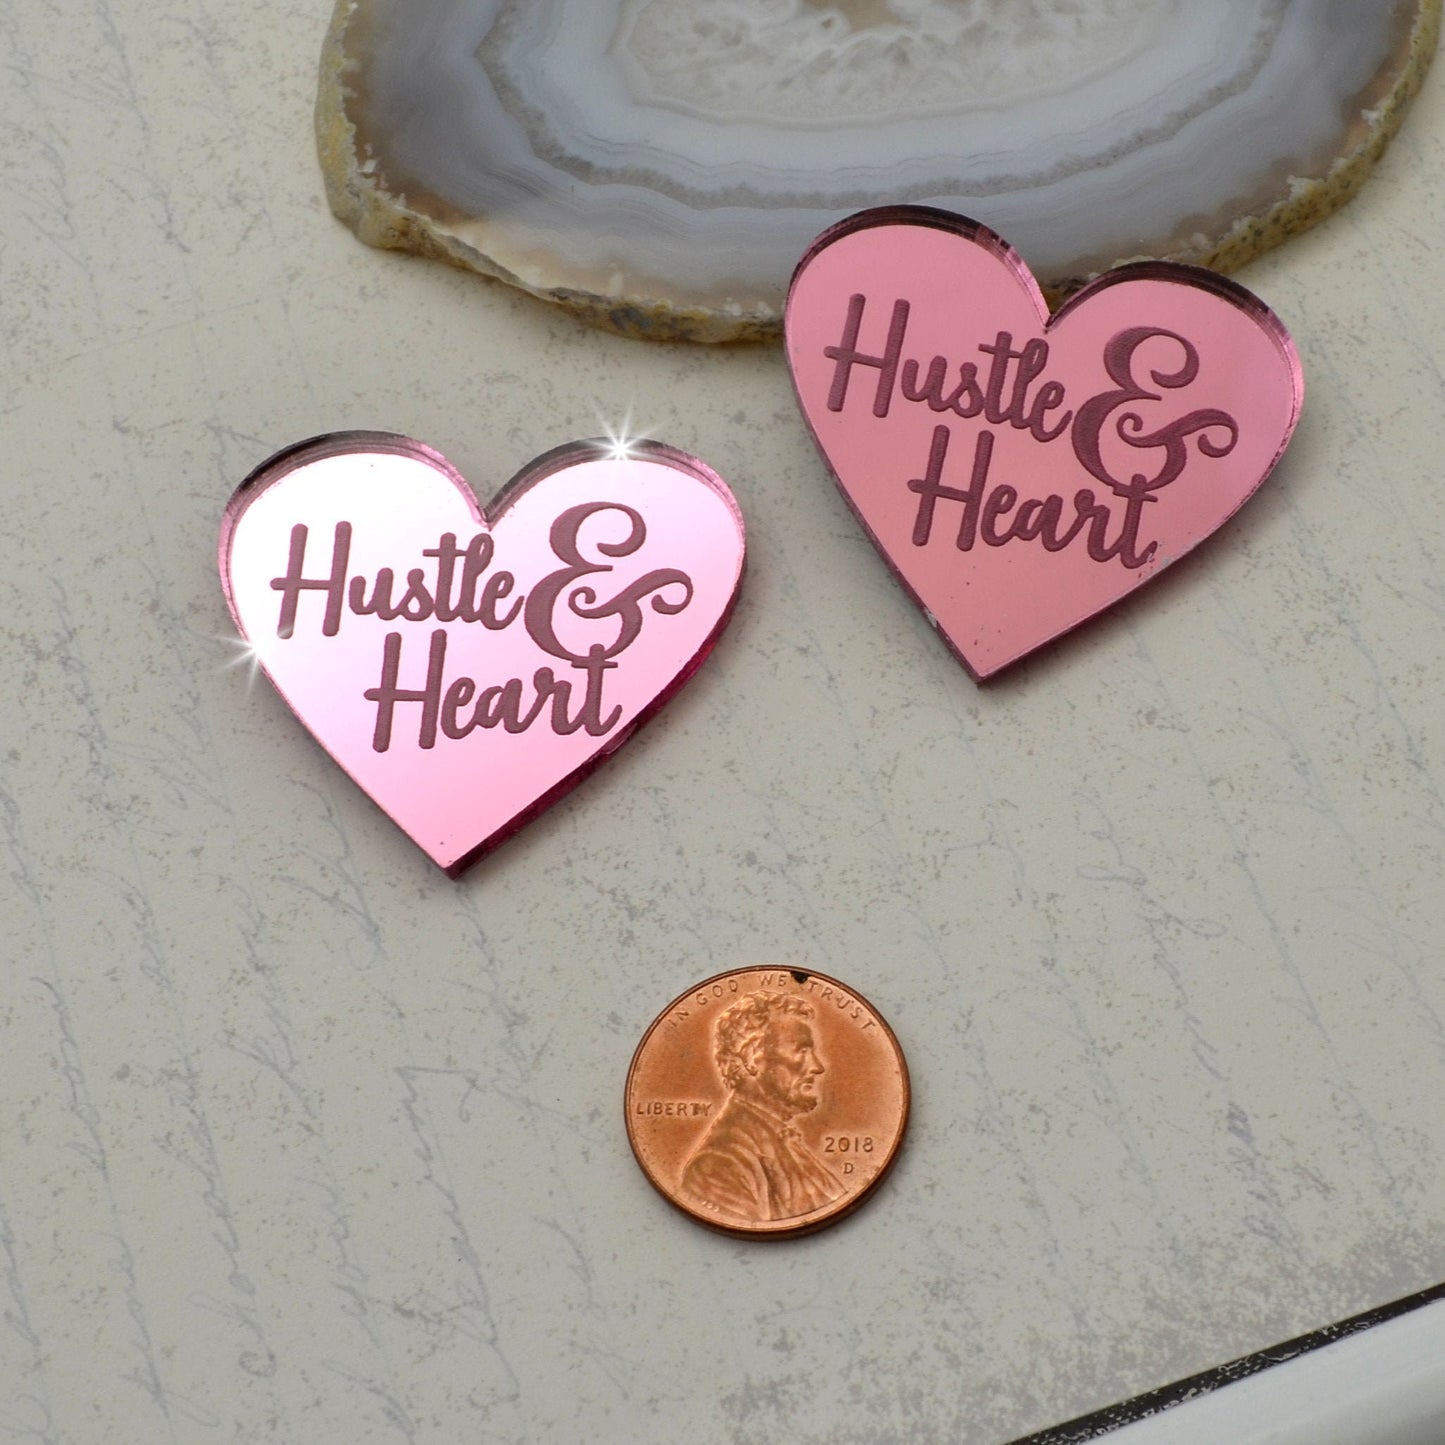 HUSTLE AND HEART - Pink Mirror Laser Cut Acrylic Cabs - Set of 2 Flatback Cabochons